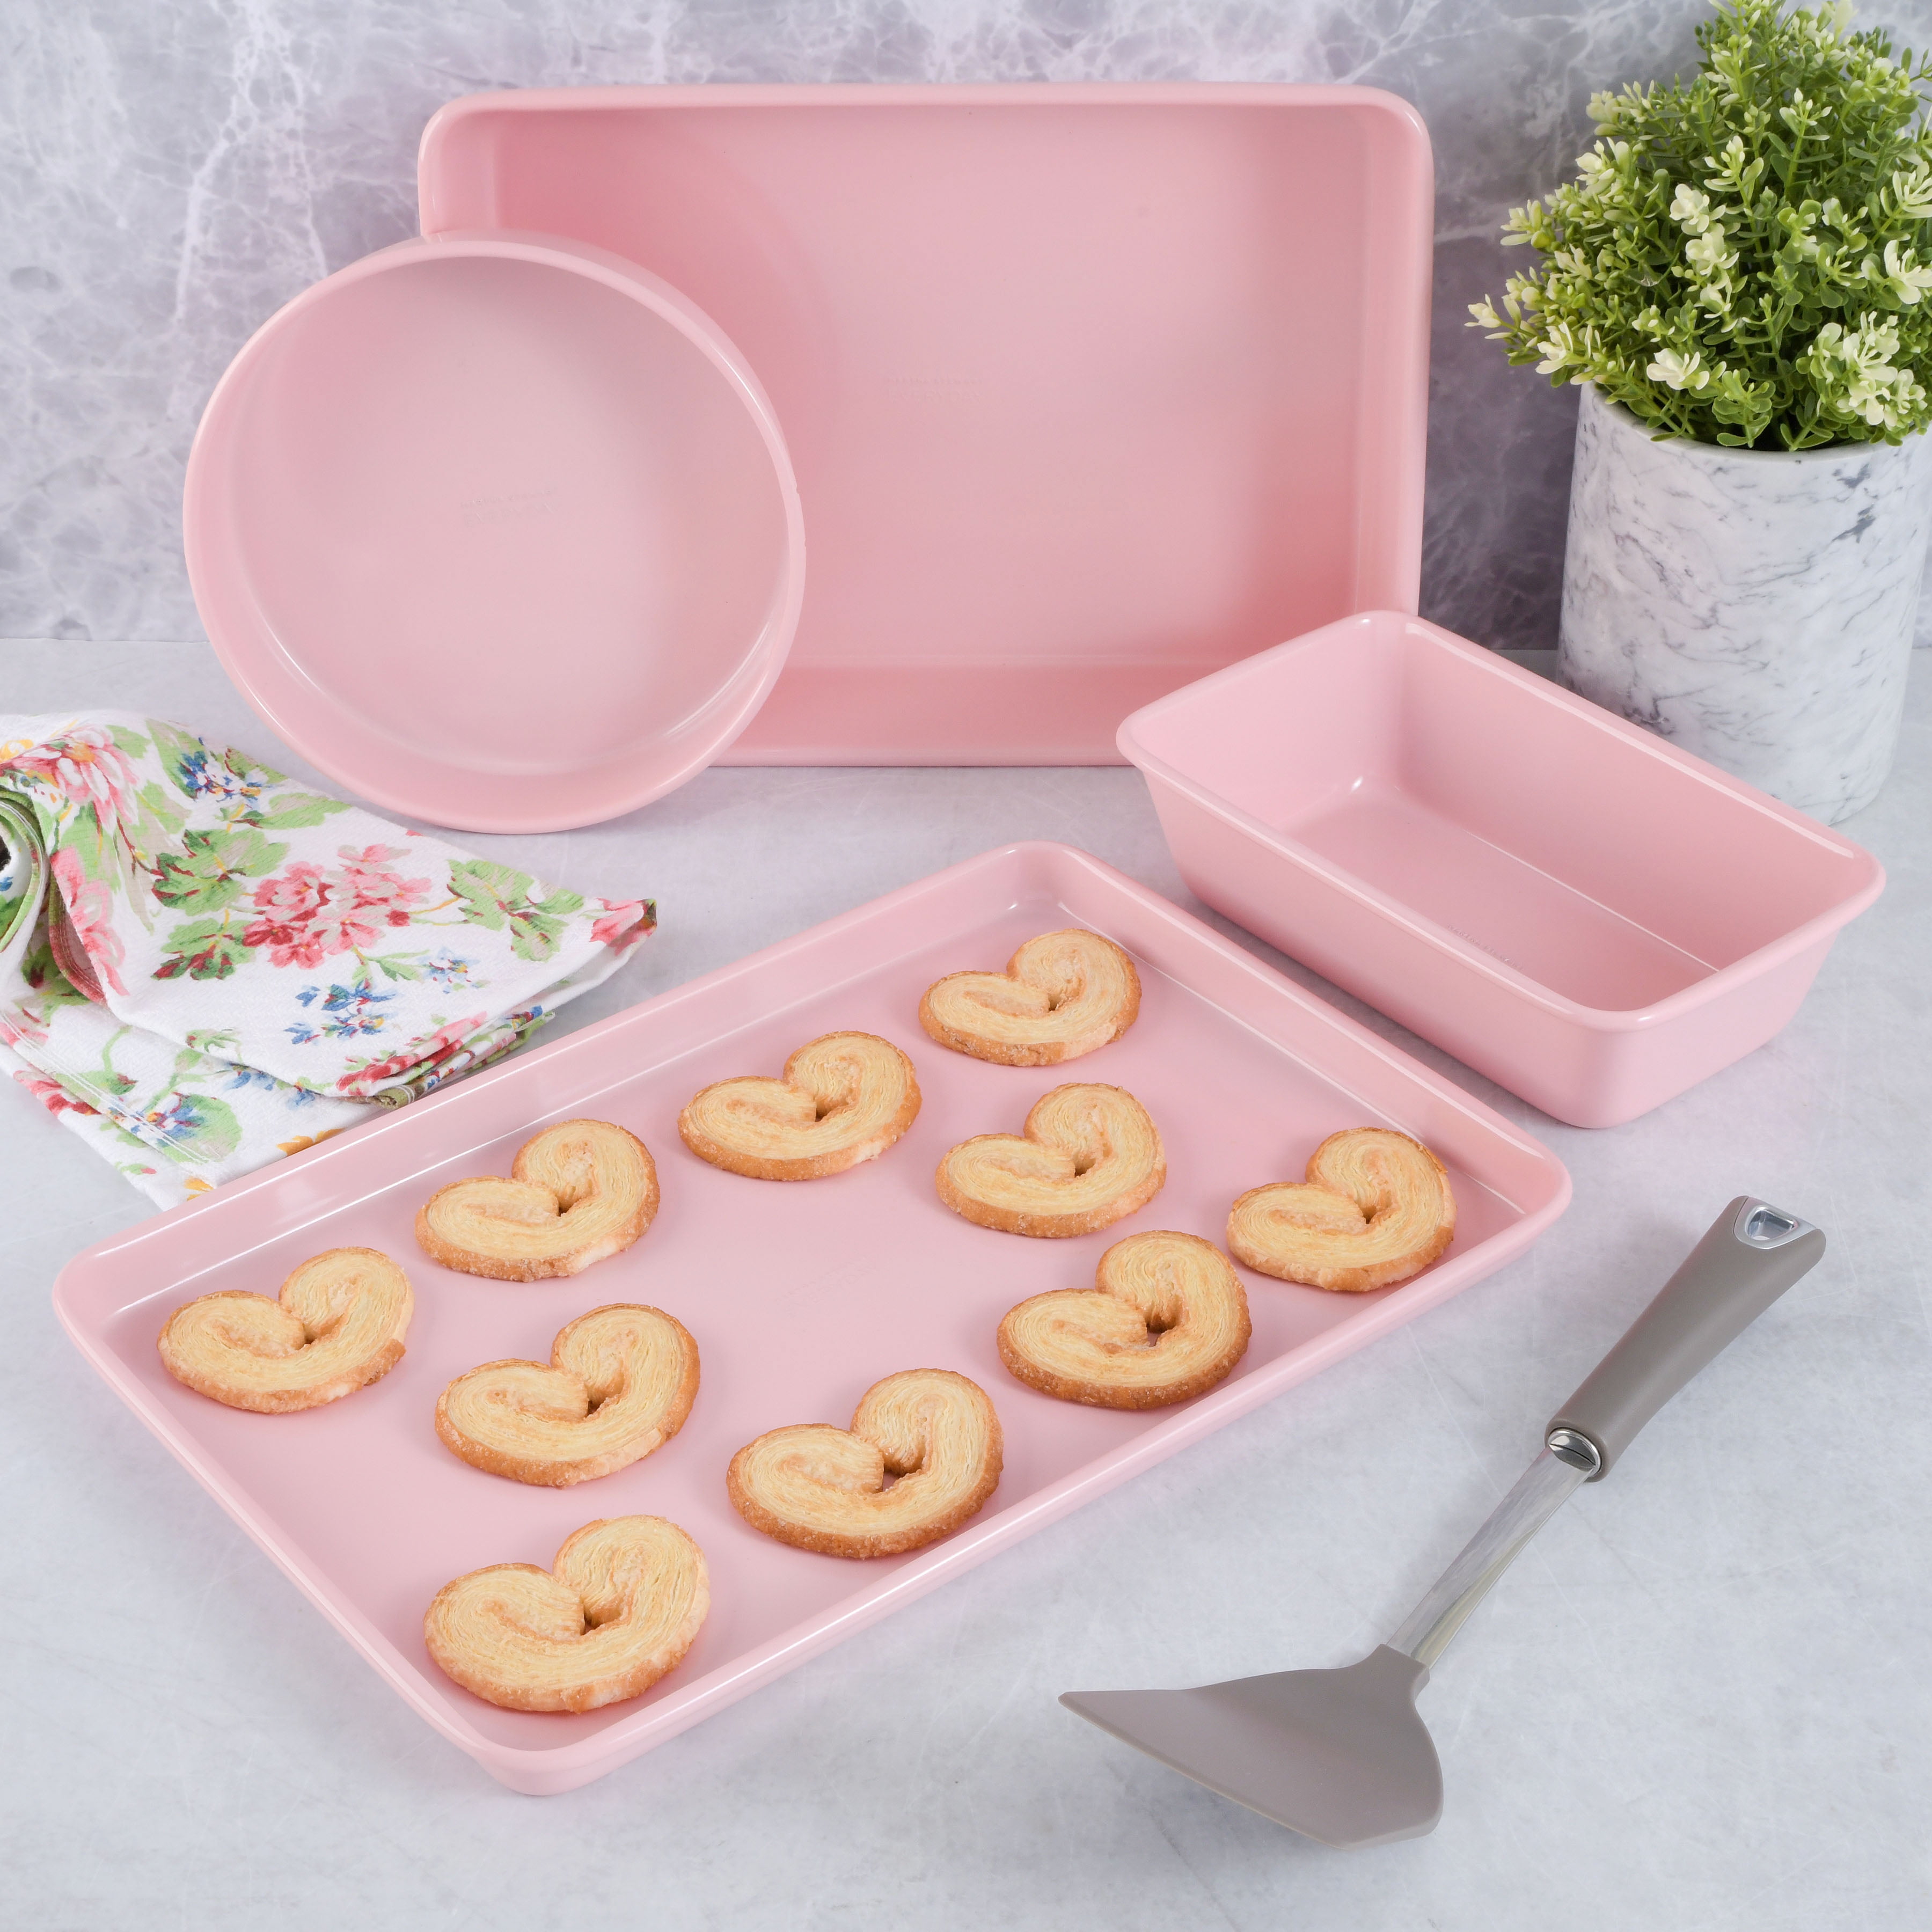 Martha Stewart - Make your cookware collection pretty in pink with